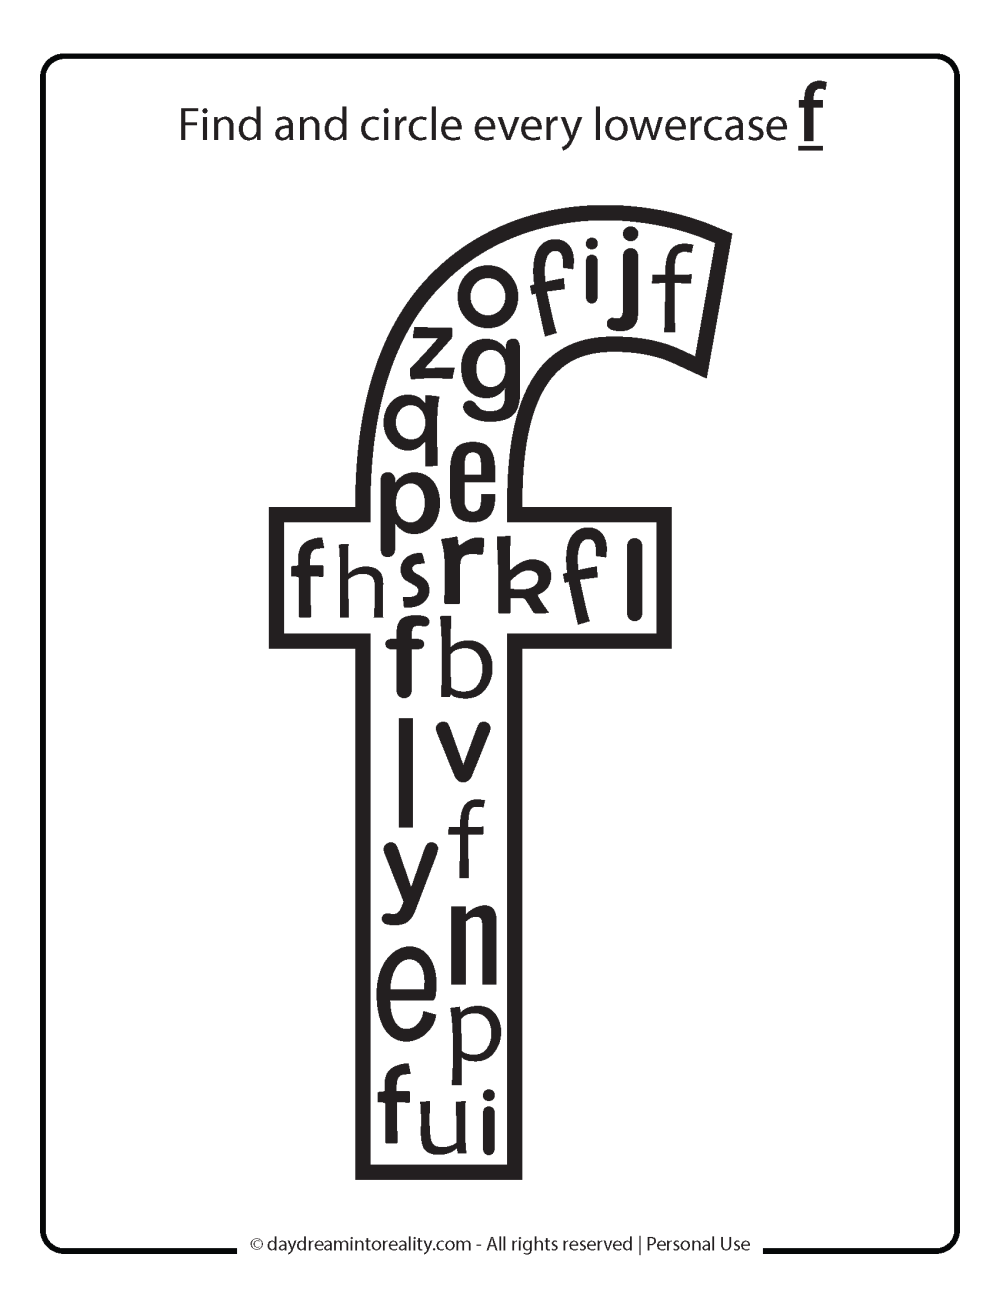 Lowercase Letter F recognition worksheets Free Printable